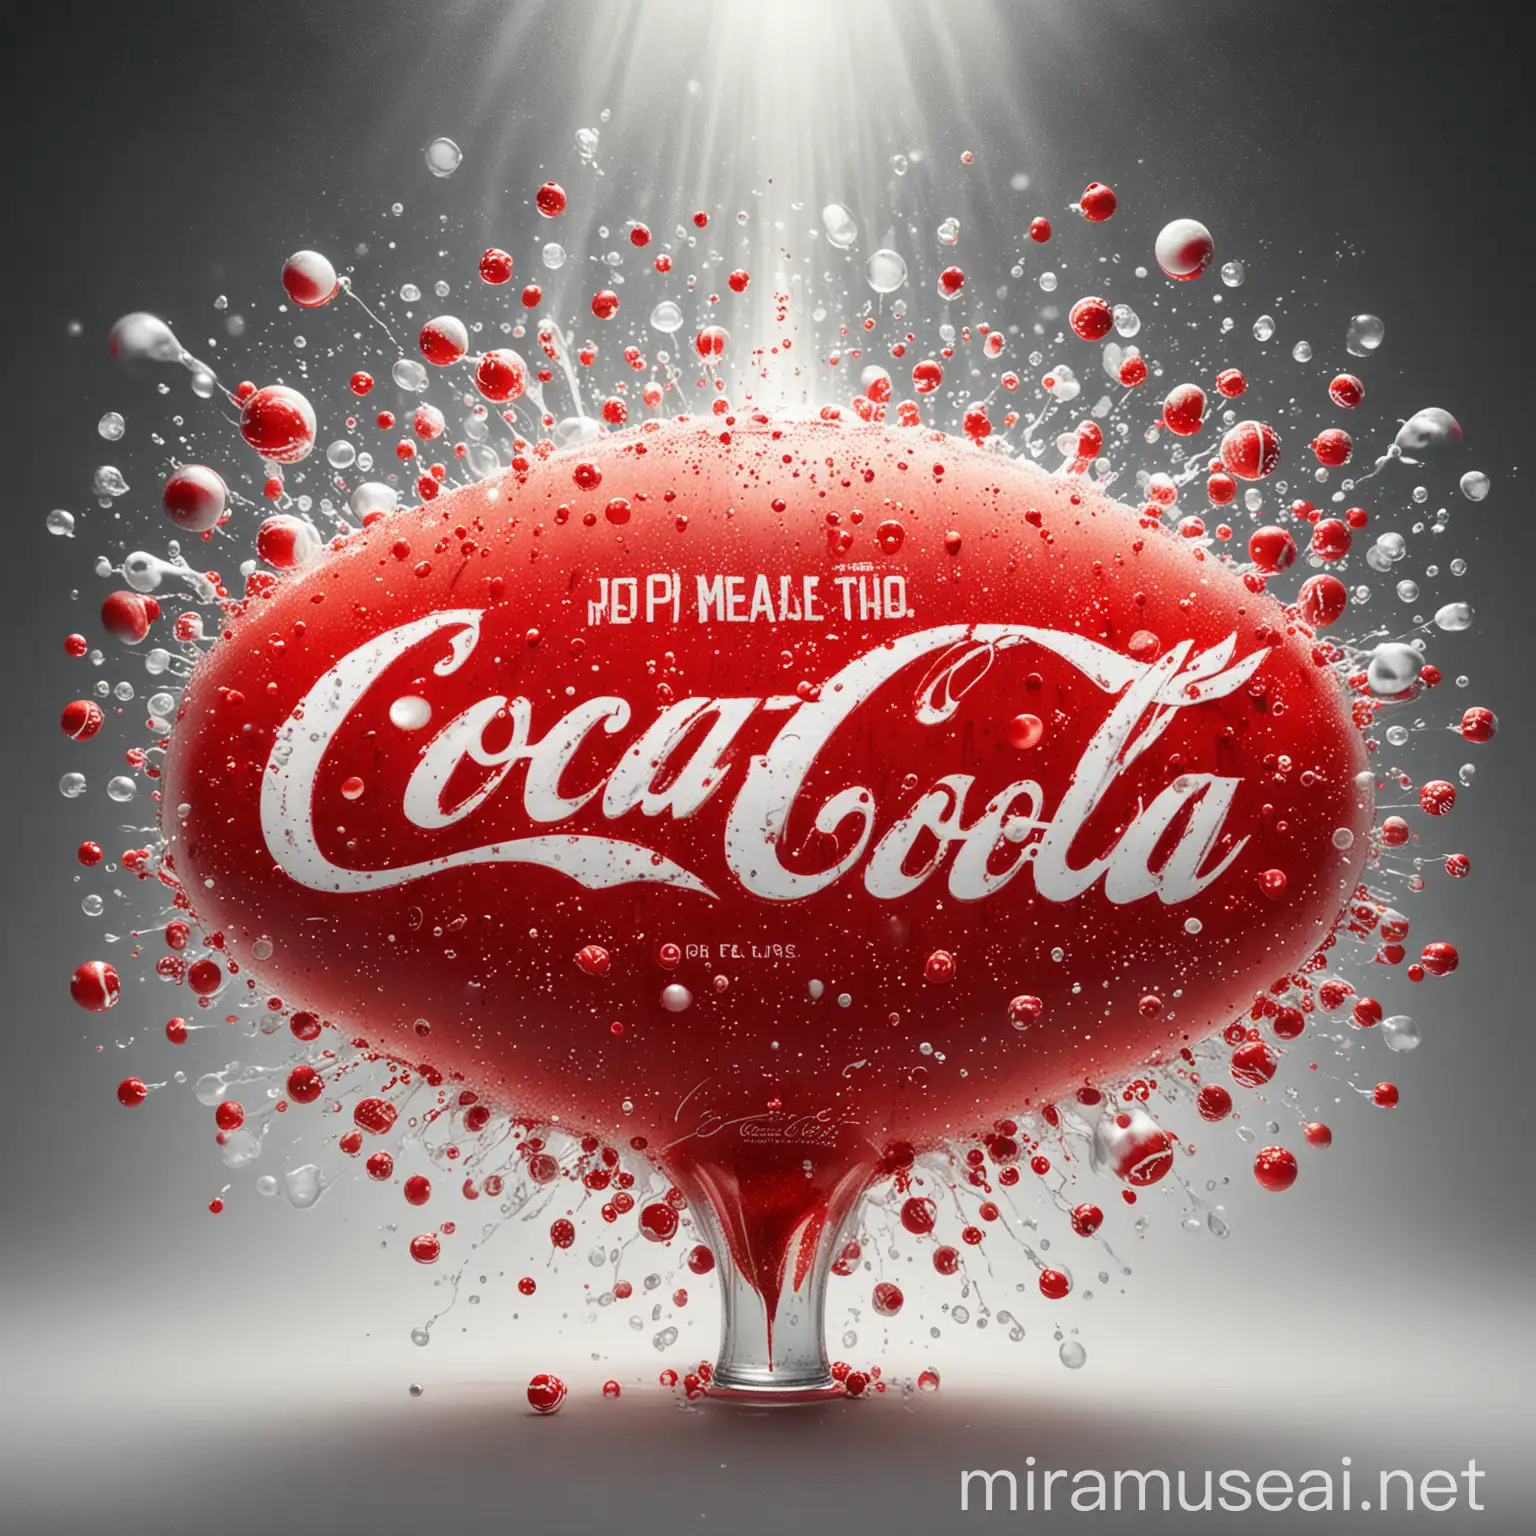 Dynamic CocaCola Logo with Effervescent Bubbles in Vibrant Red and White